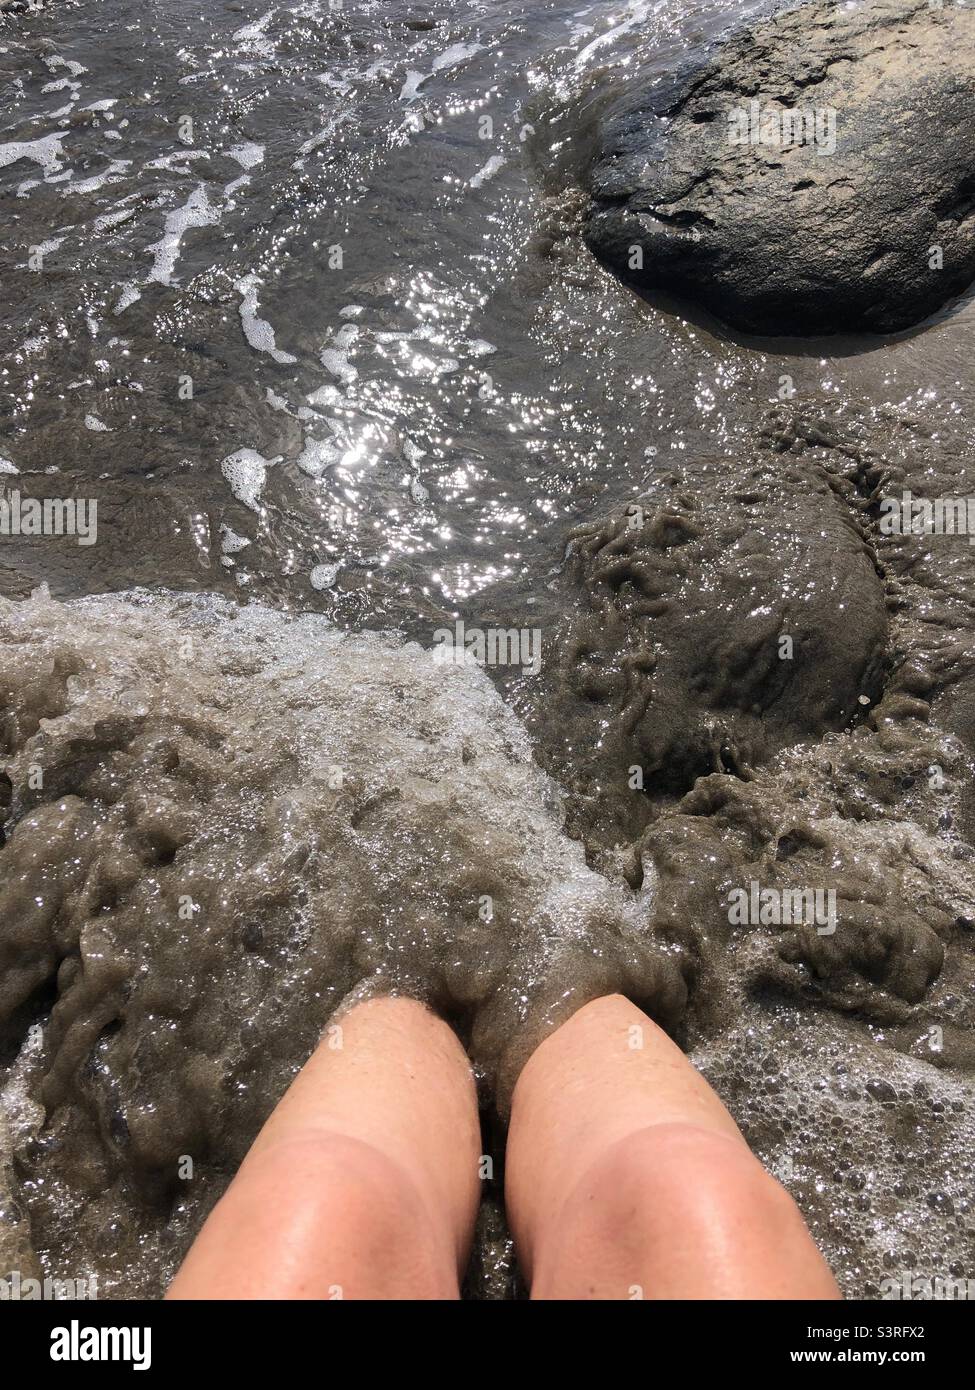 A woman has feet submerged in mud by the sea. Stock Photo